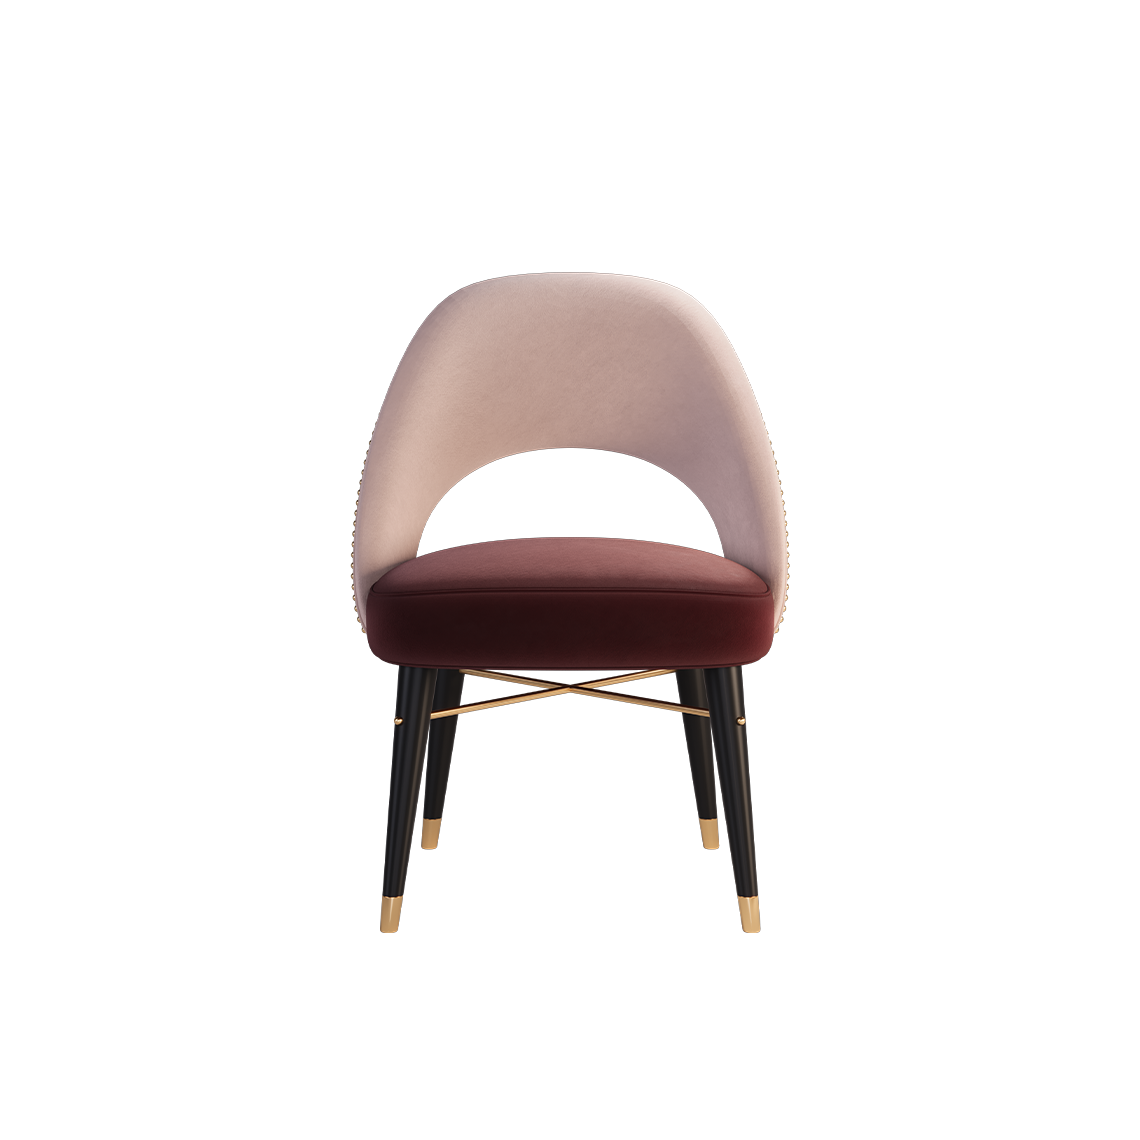 Shirley Dining Chair